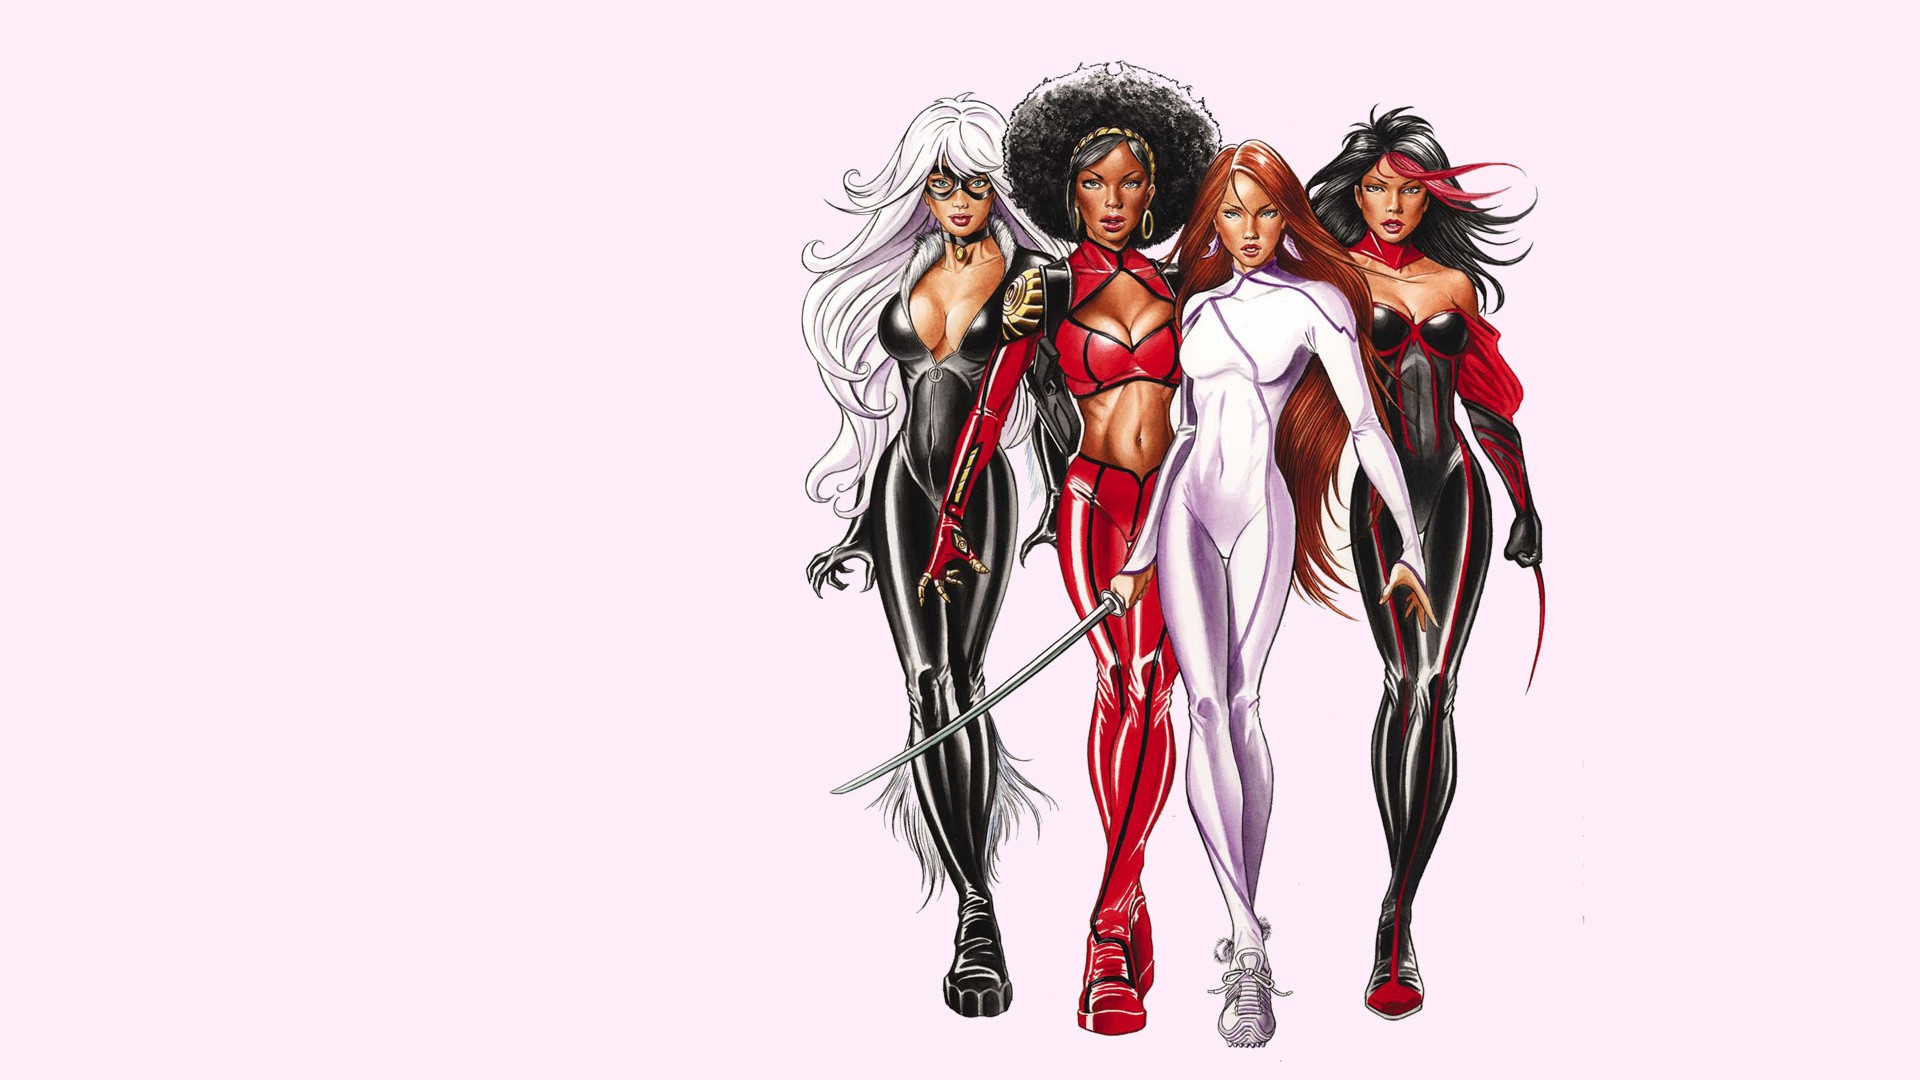 General 1920x1080 Heroes for Hire Marvel Comics superhero Felicia Hardy Misty Knight simple background frontal view women group of women white background boobs belly slim body standing white hair redhead black hair women with swords sword weapon